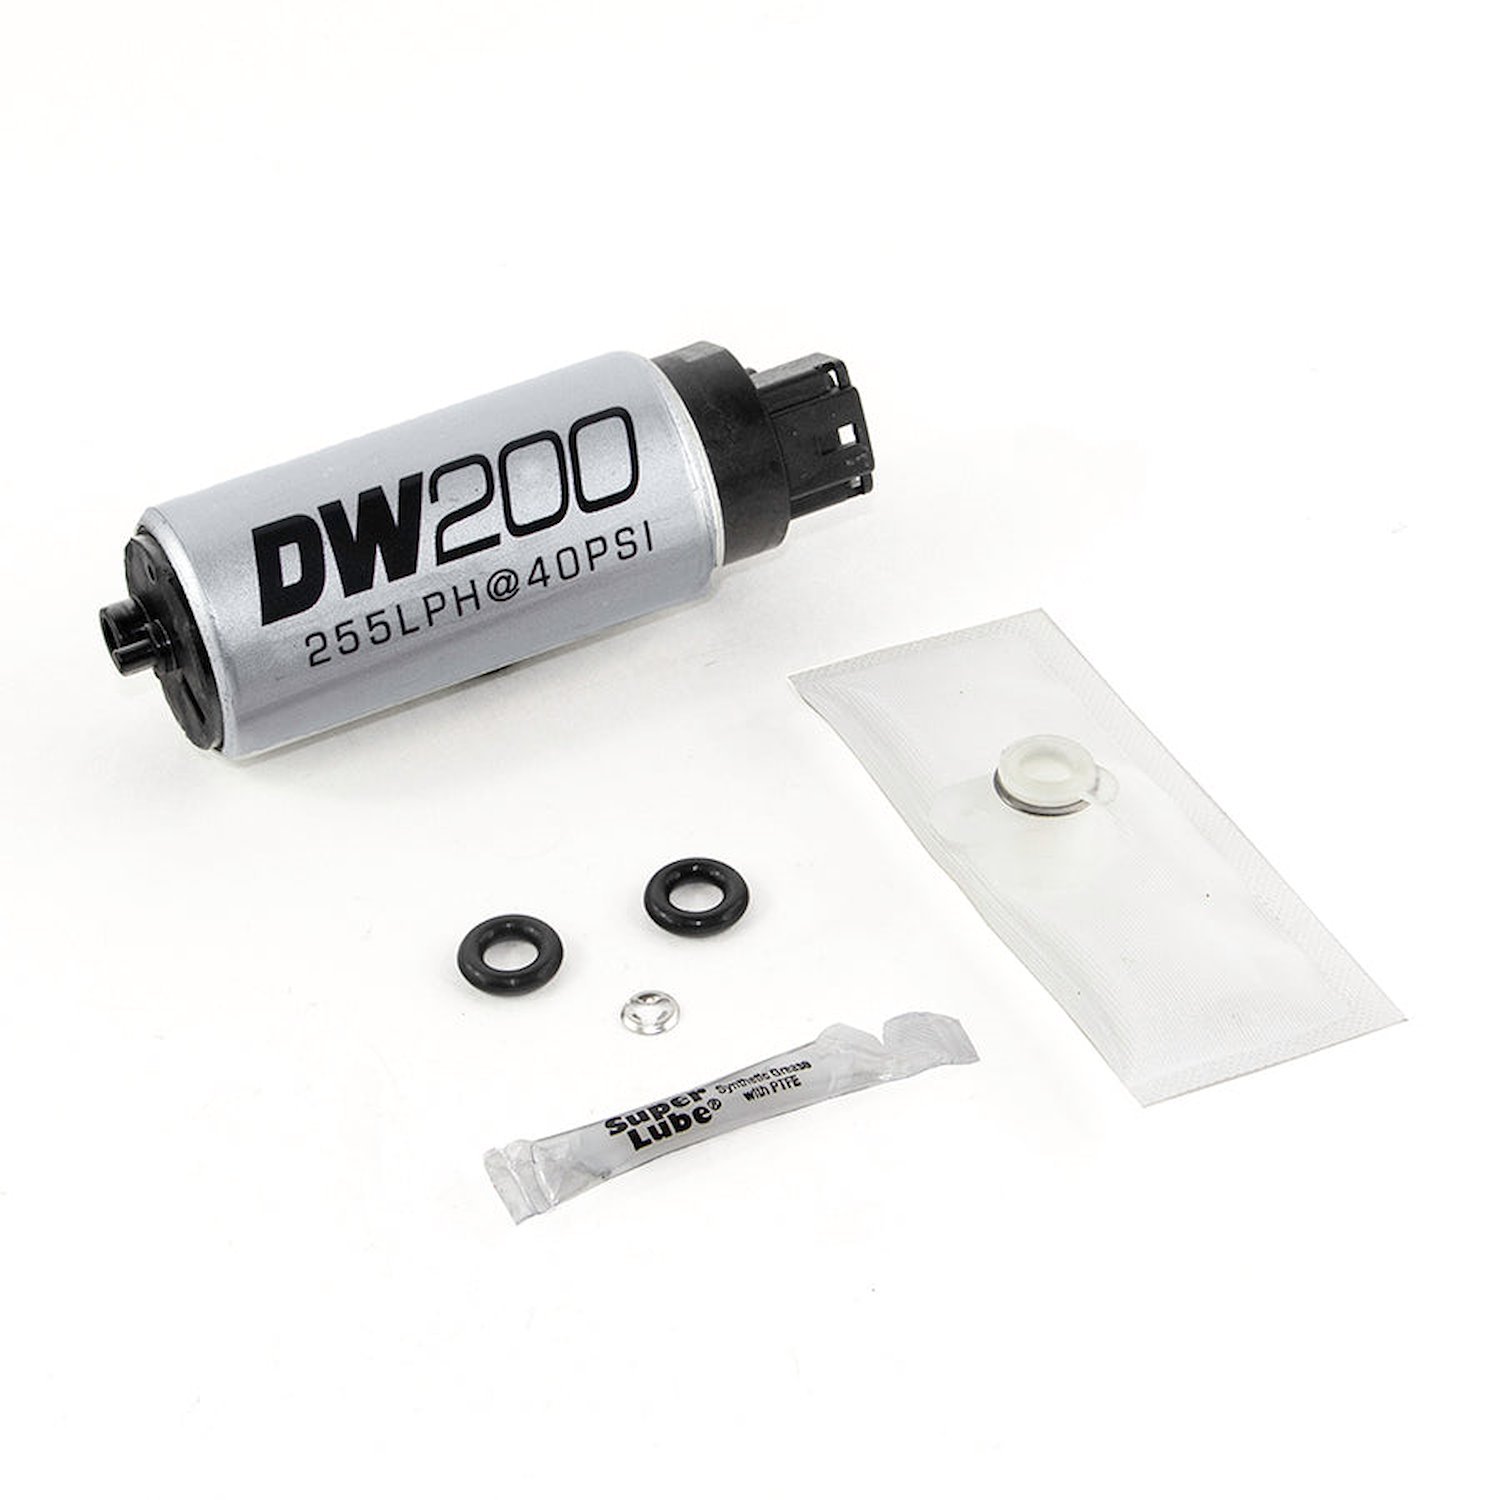 9201s1007 DW200 series 255lph in-tank fuel pump w/ install kit for Civic (Excludes Si) 06-11